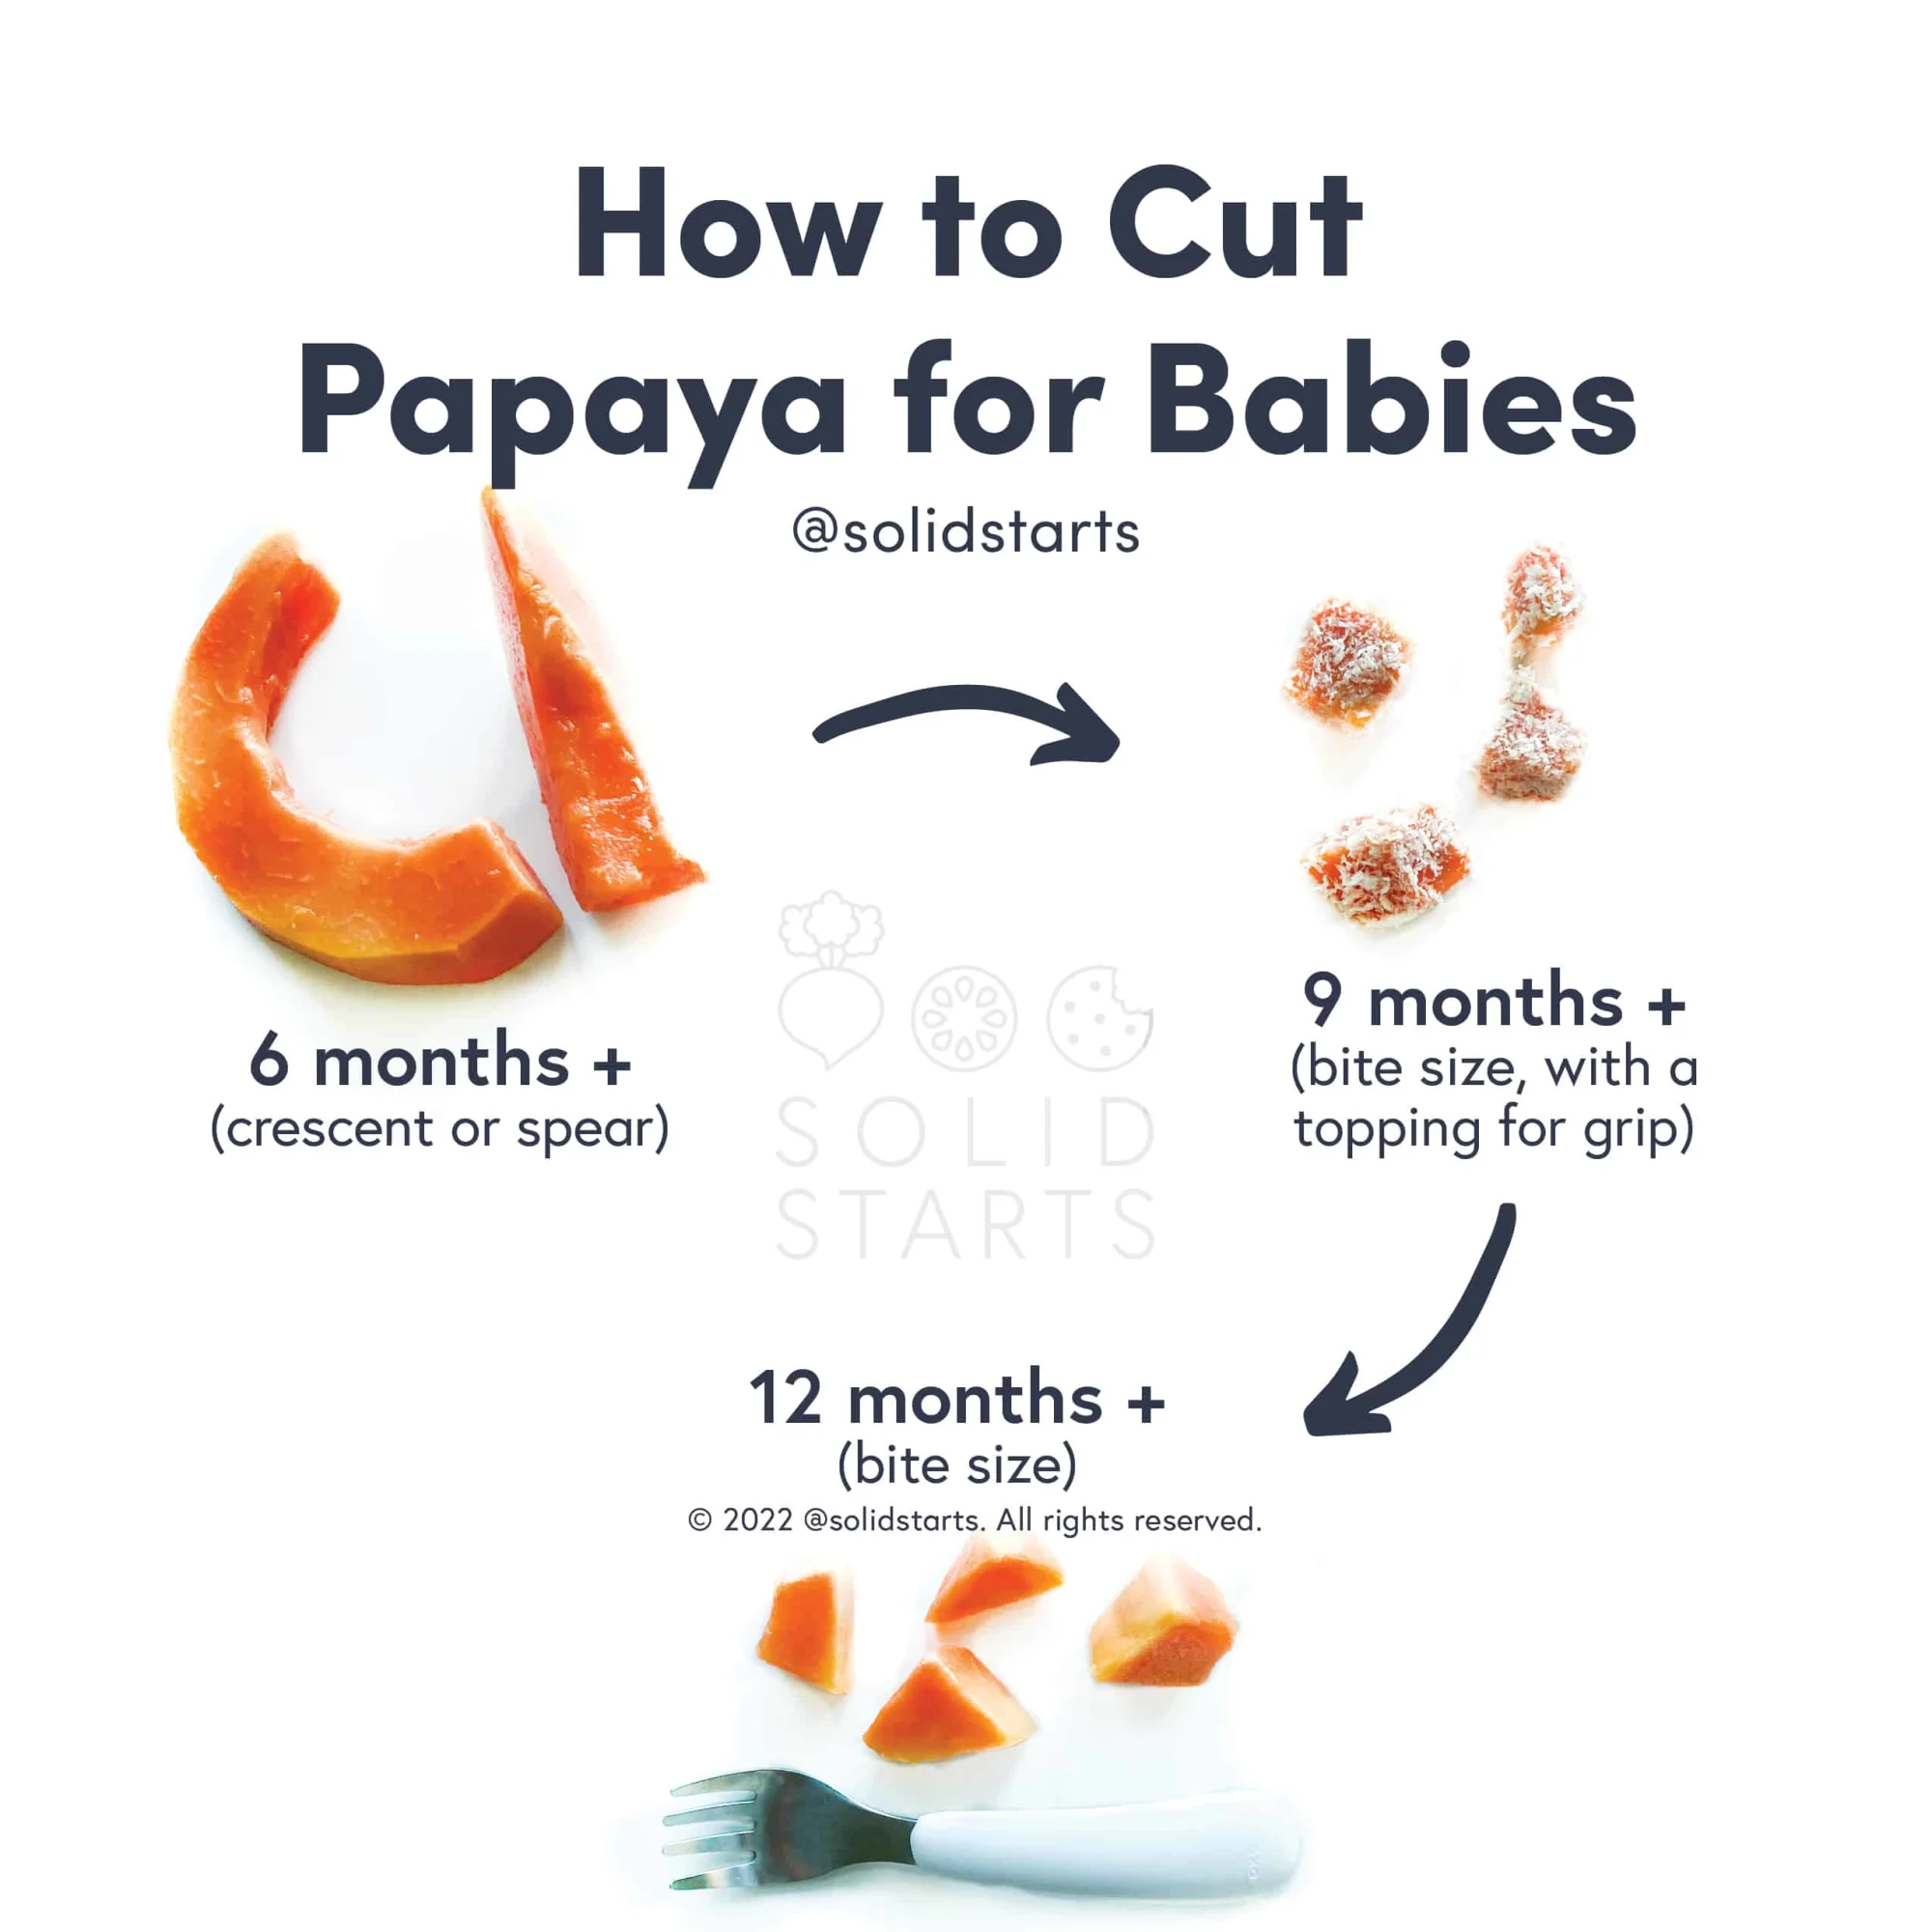 a Solid Starts infographic with the header How to Cut Papaya for Babies: large ripe handles or spears for 6 months+, bite size pieces coated in a topping for grip for 9 months+, bite size pieces for 12 months+